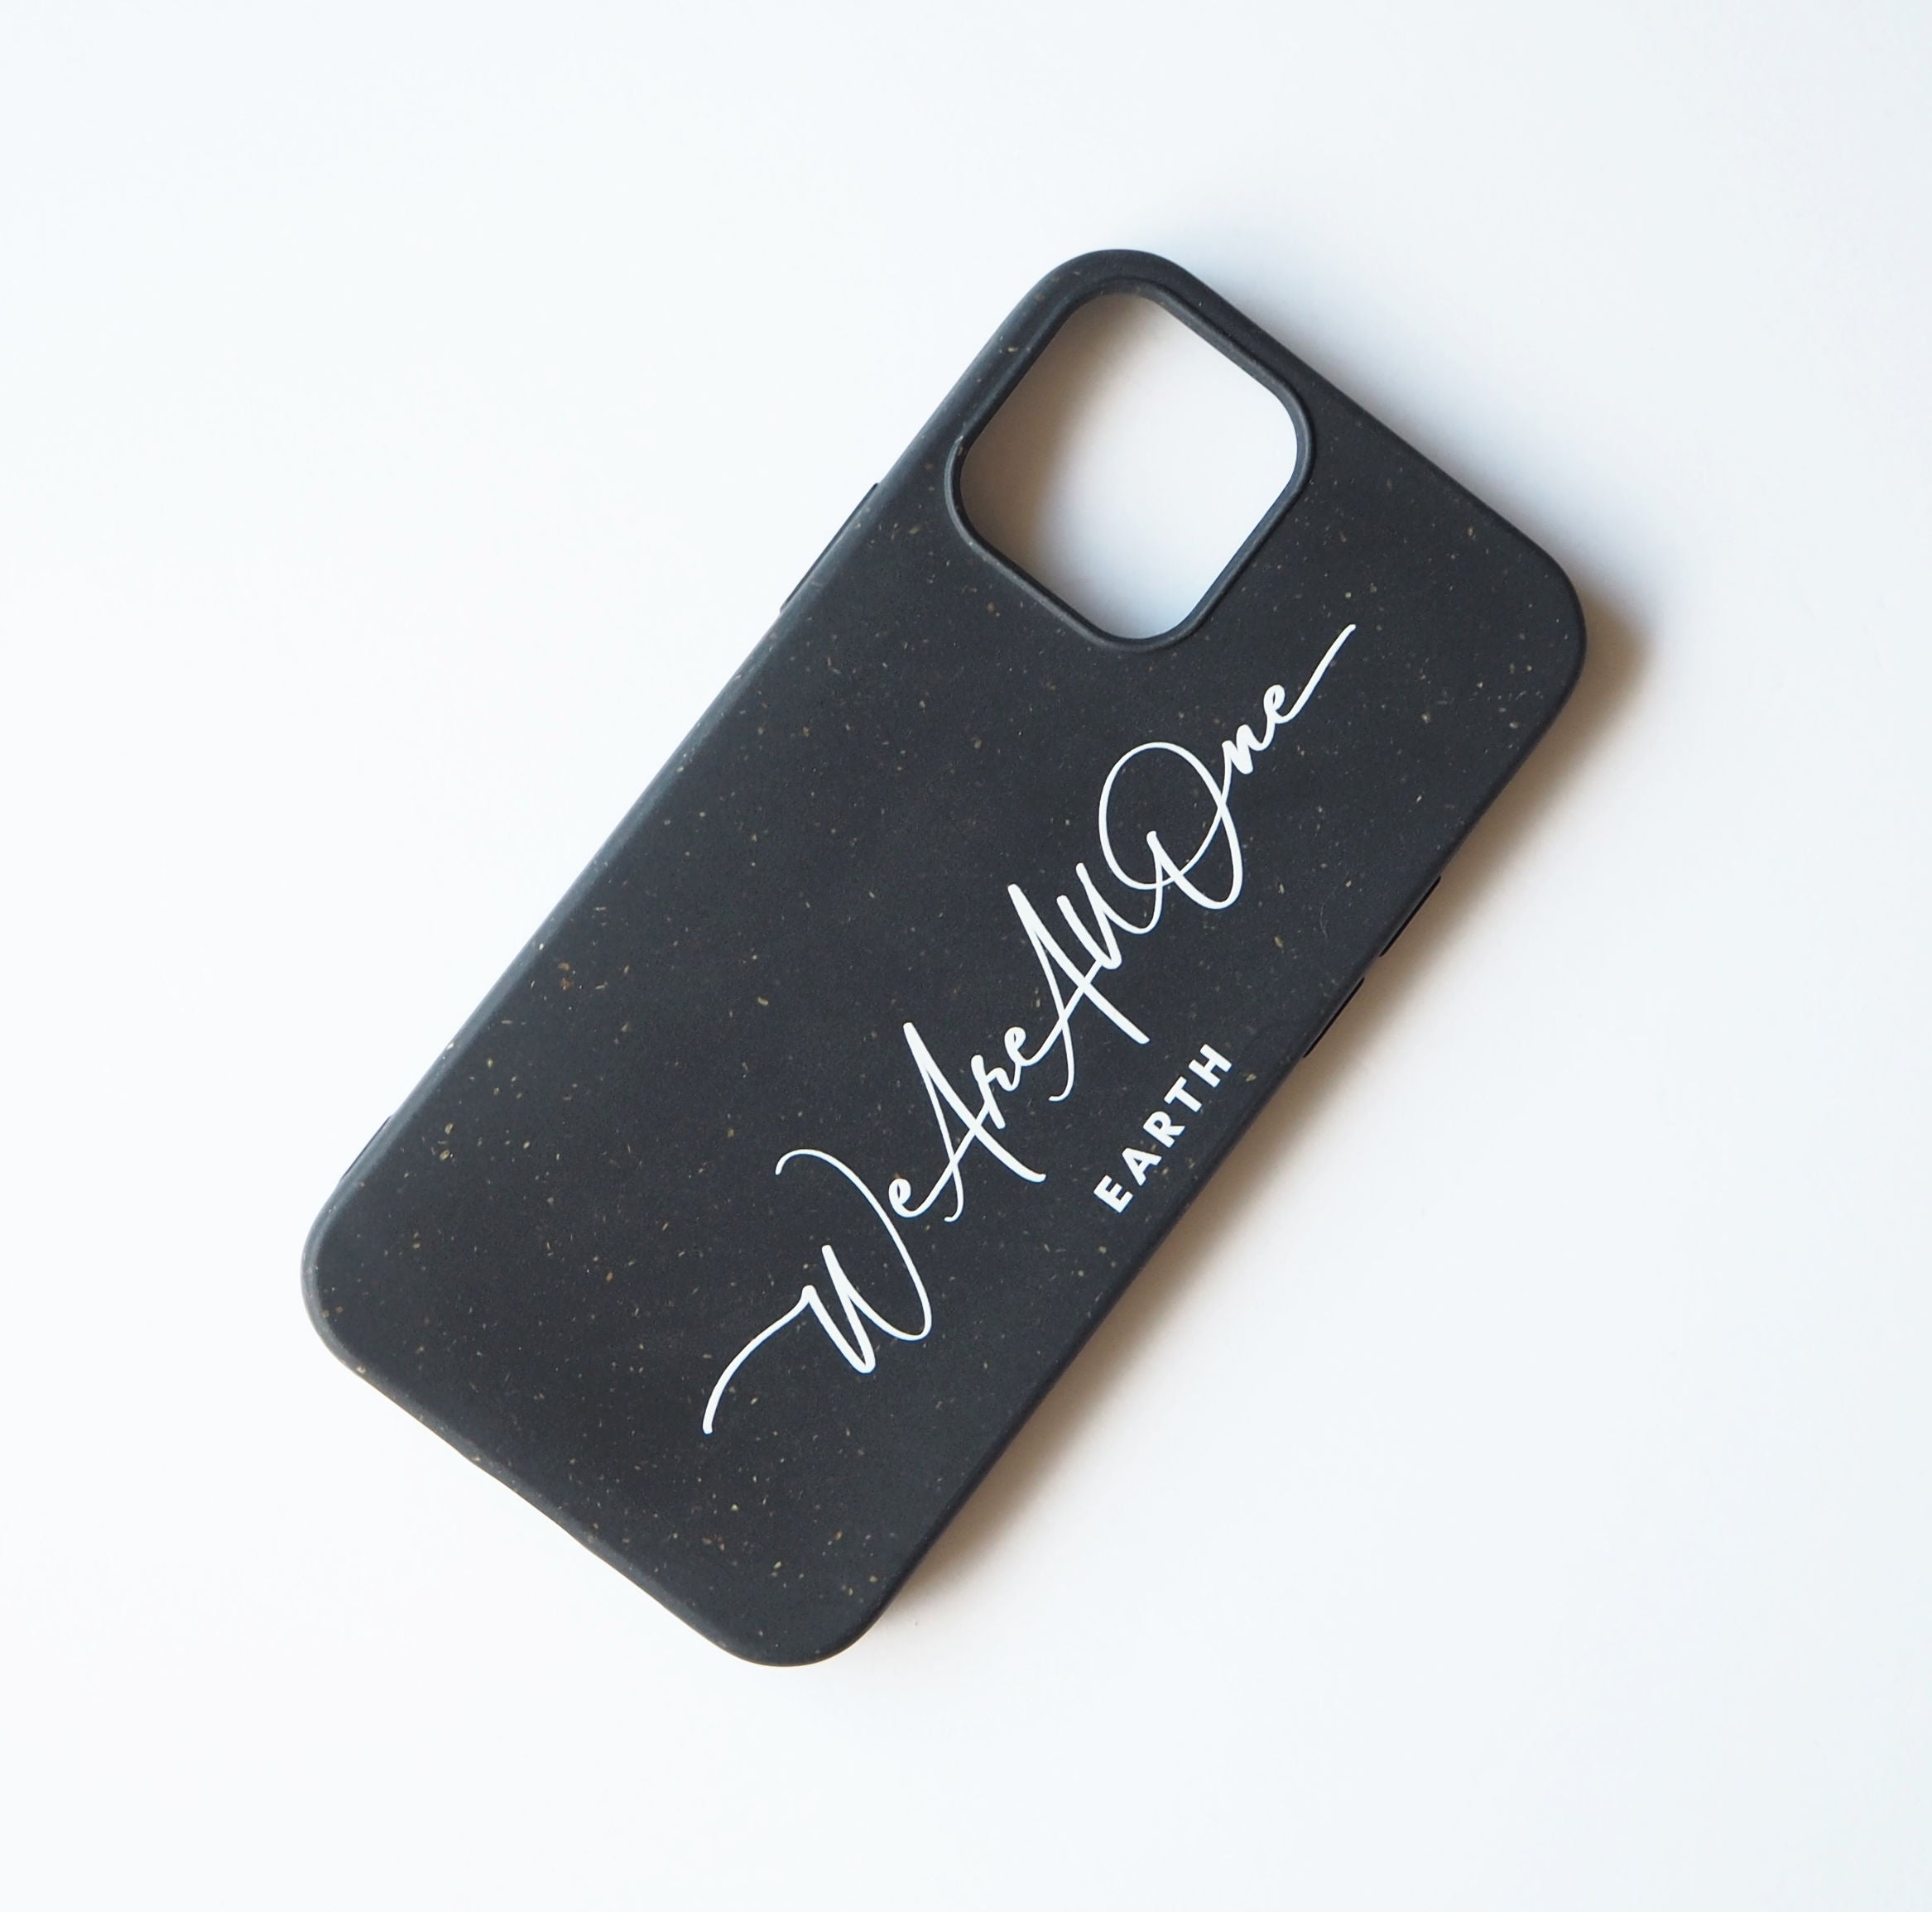 "We Are All One" Eco-friendly Black Phone Case